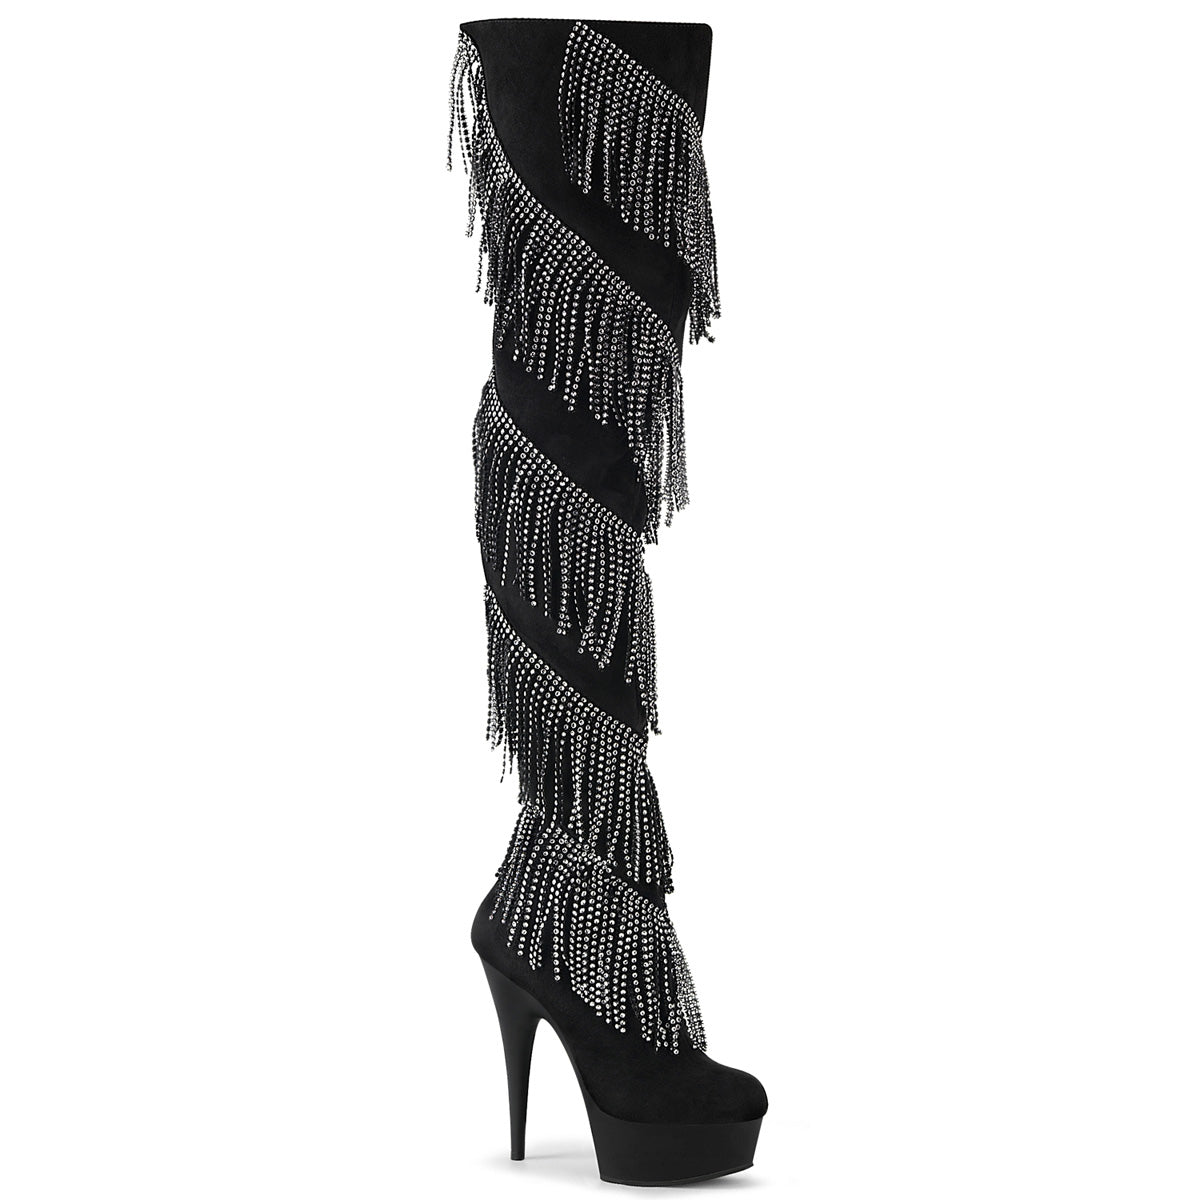 DELIGHT-3065 Black Faux Suede-Silver Thigh Boot Pleaser